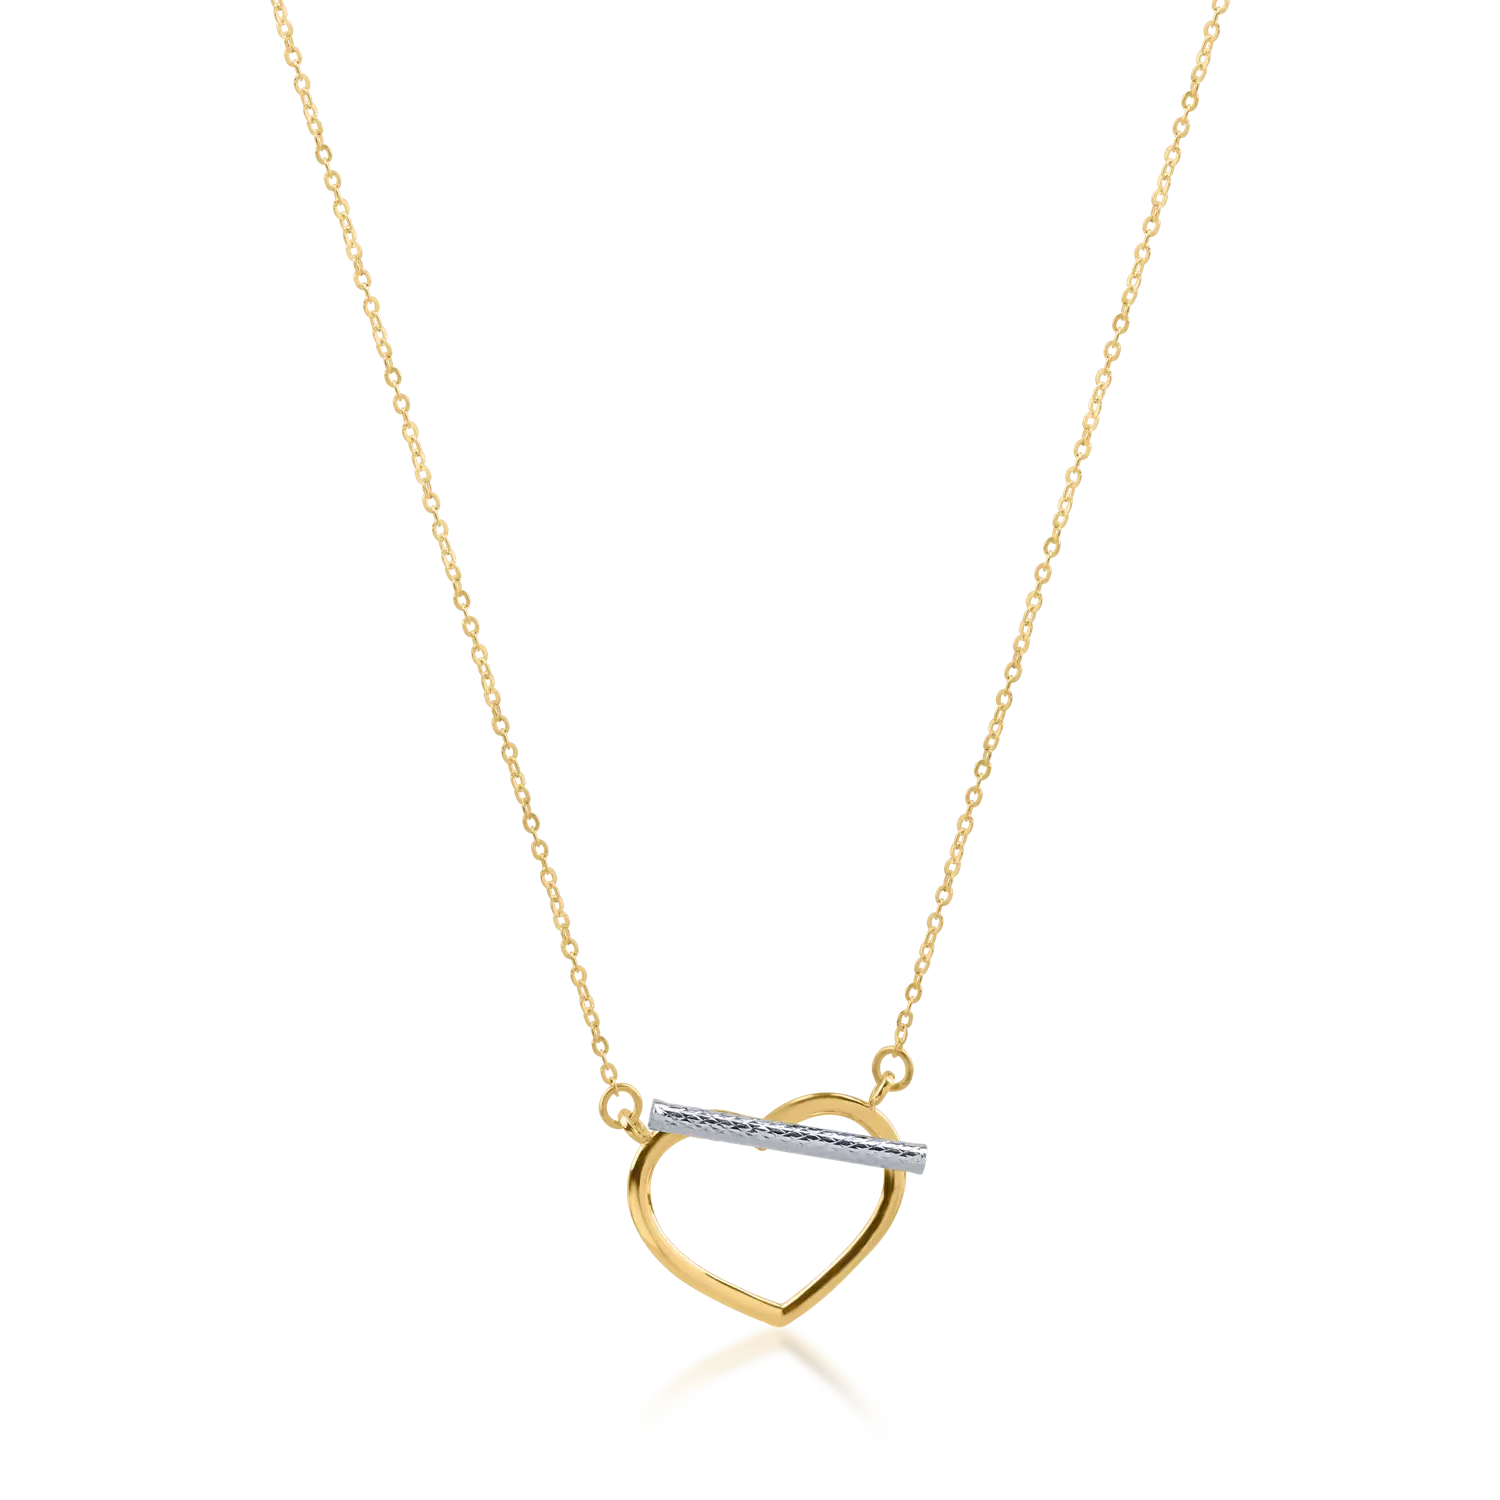 Yellow gold heart pendant chain and white gold detail